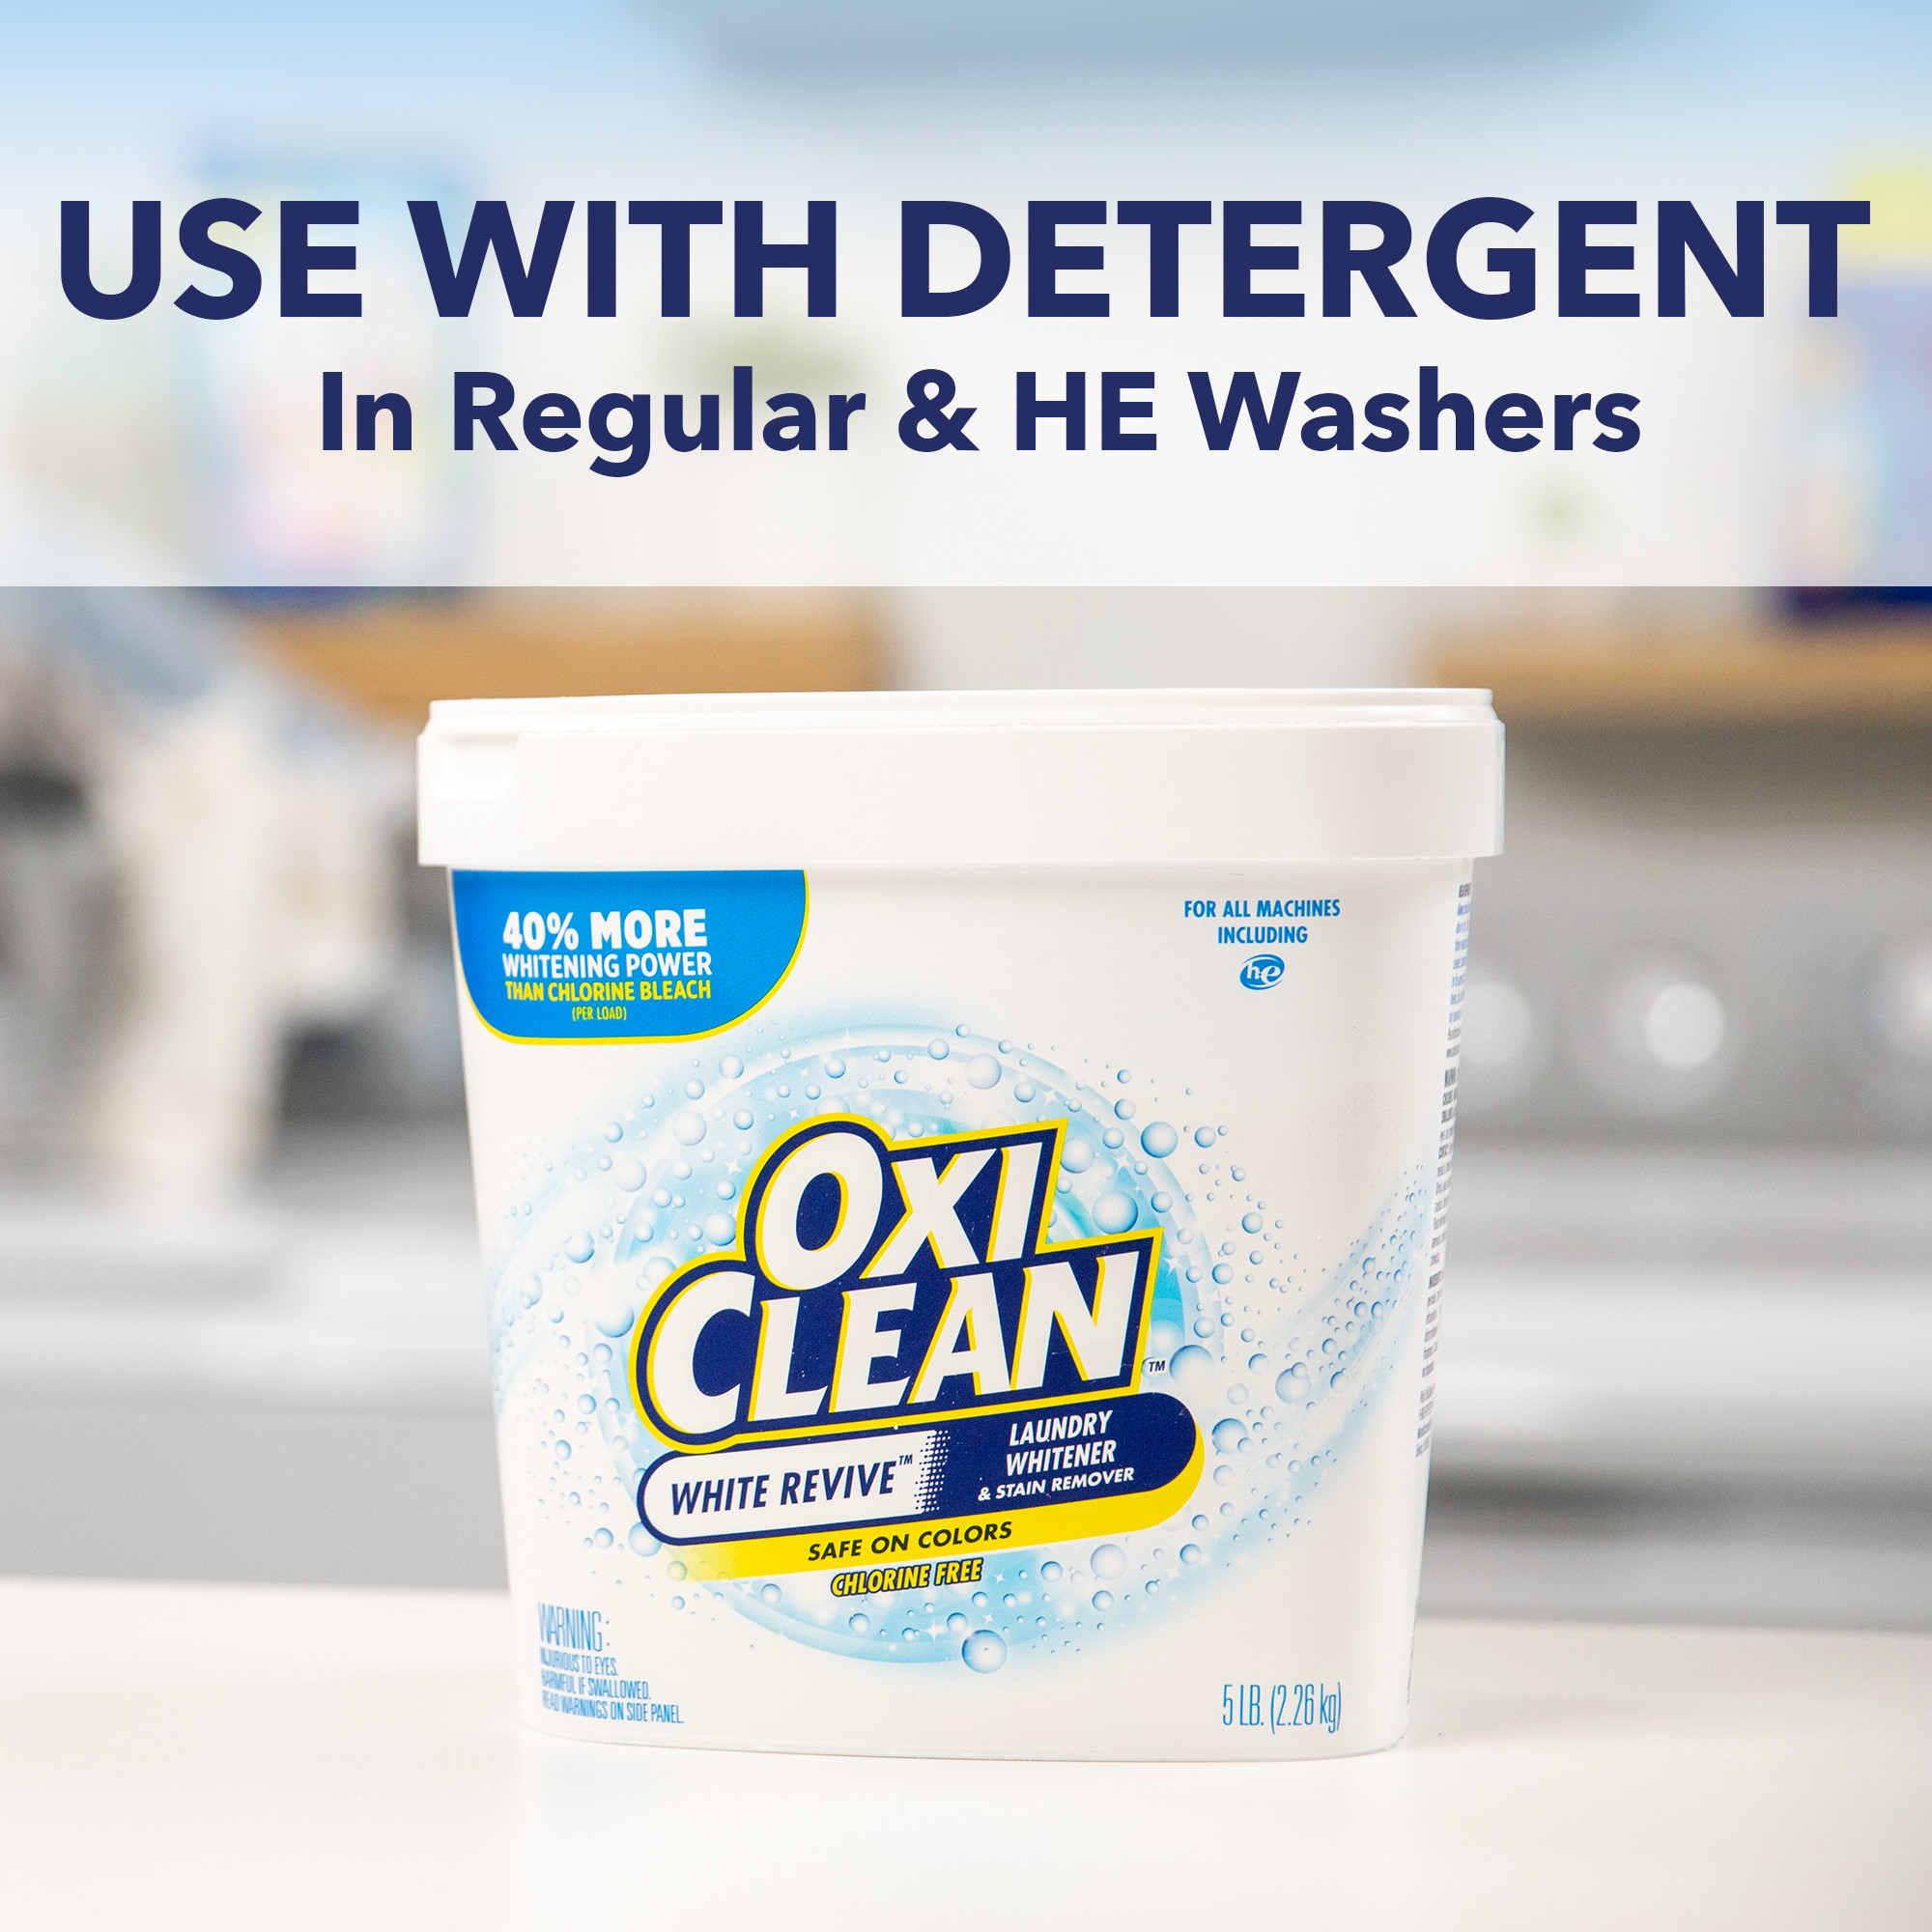 OxiClean White Revive Laundry Whitener and Stain Remover Powder For Clothes, 3 lb - image 4 of 9